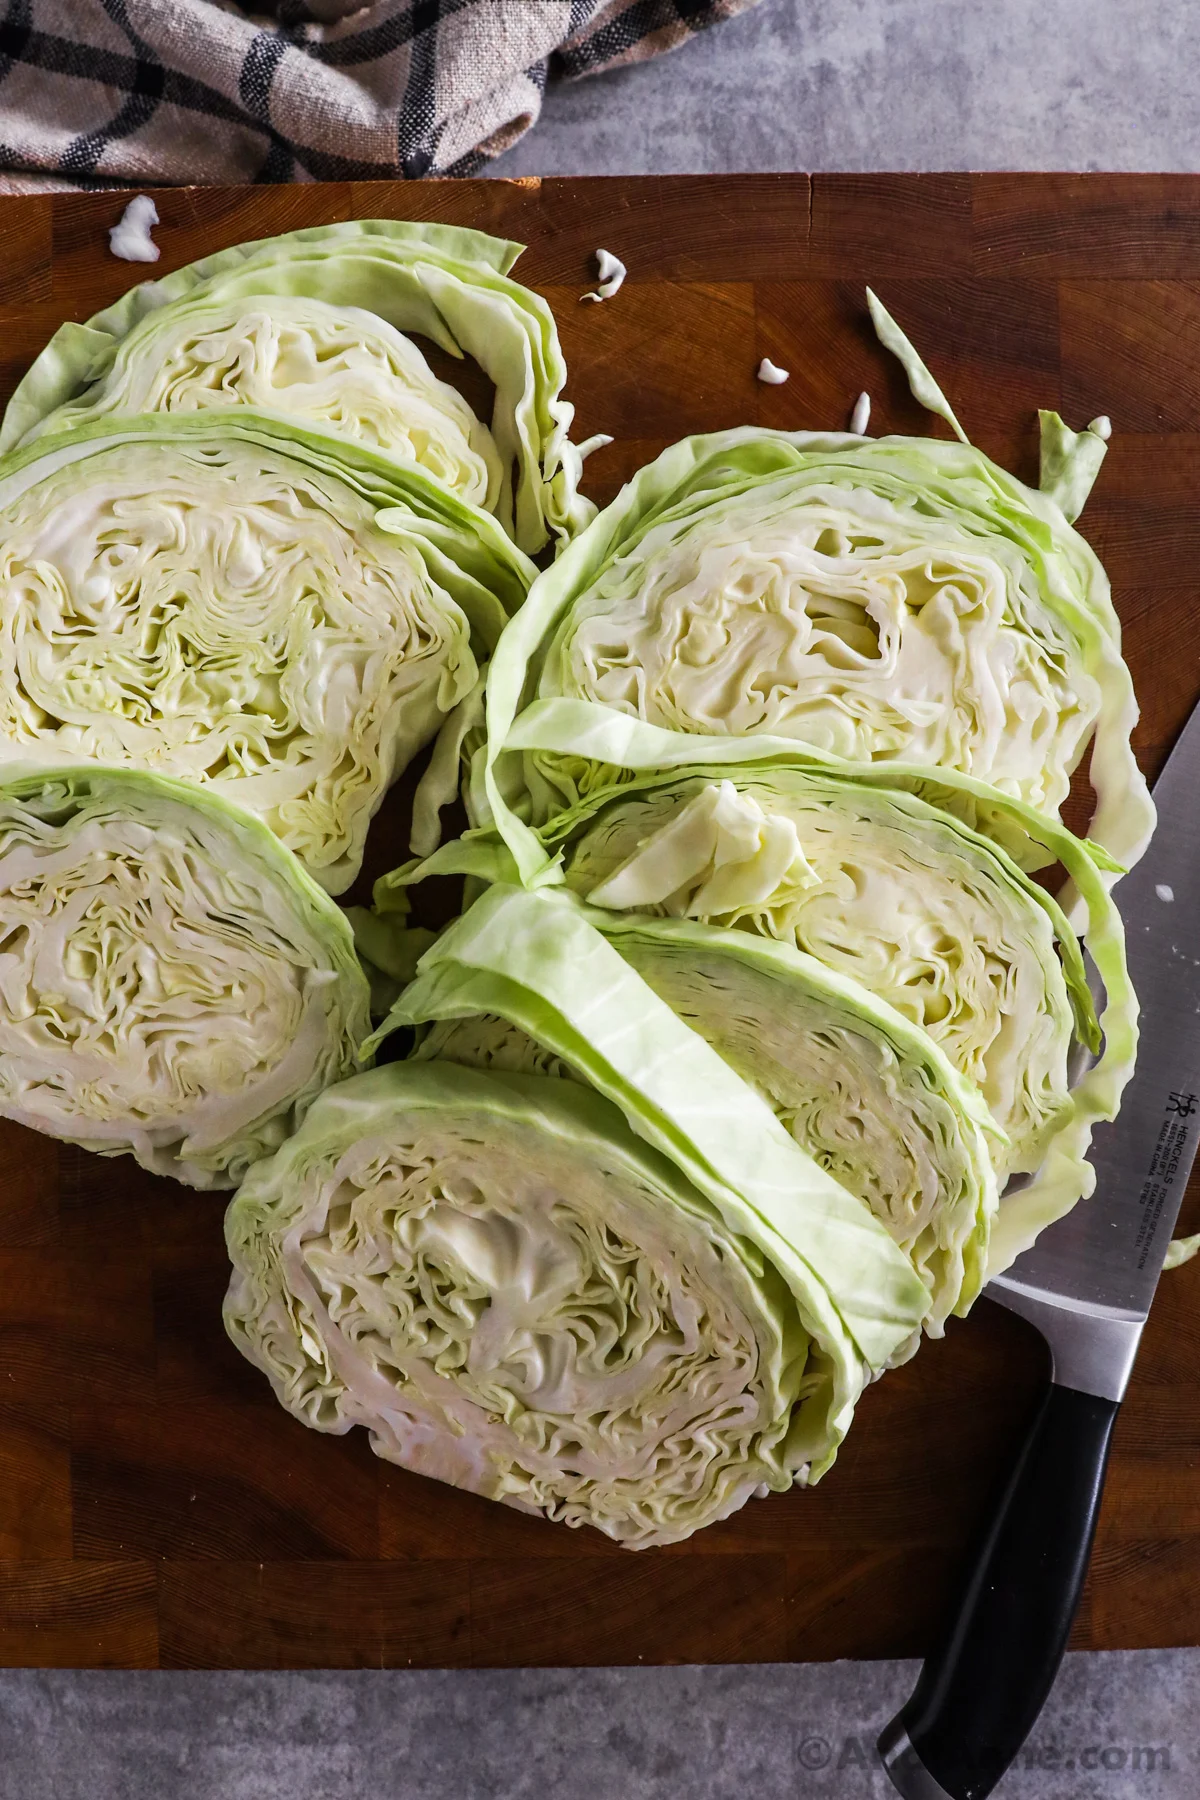 Slices of raw green cabbage.